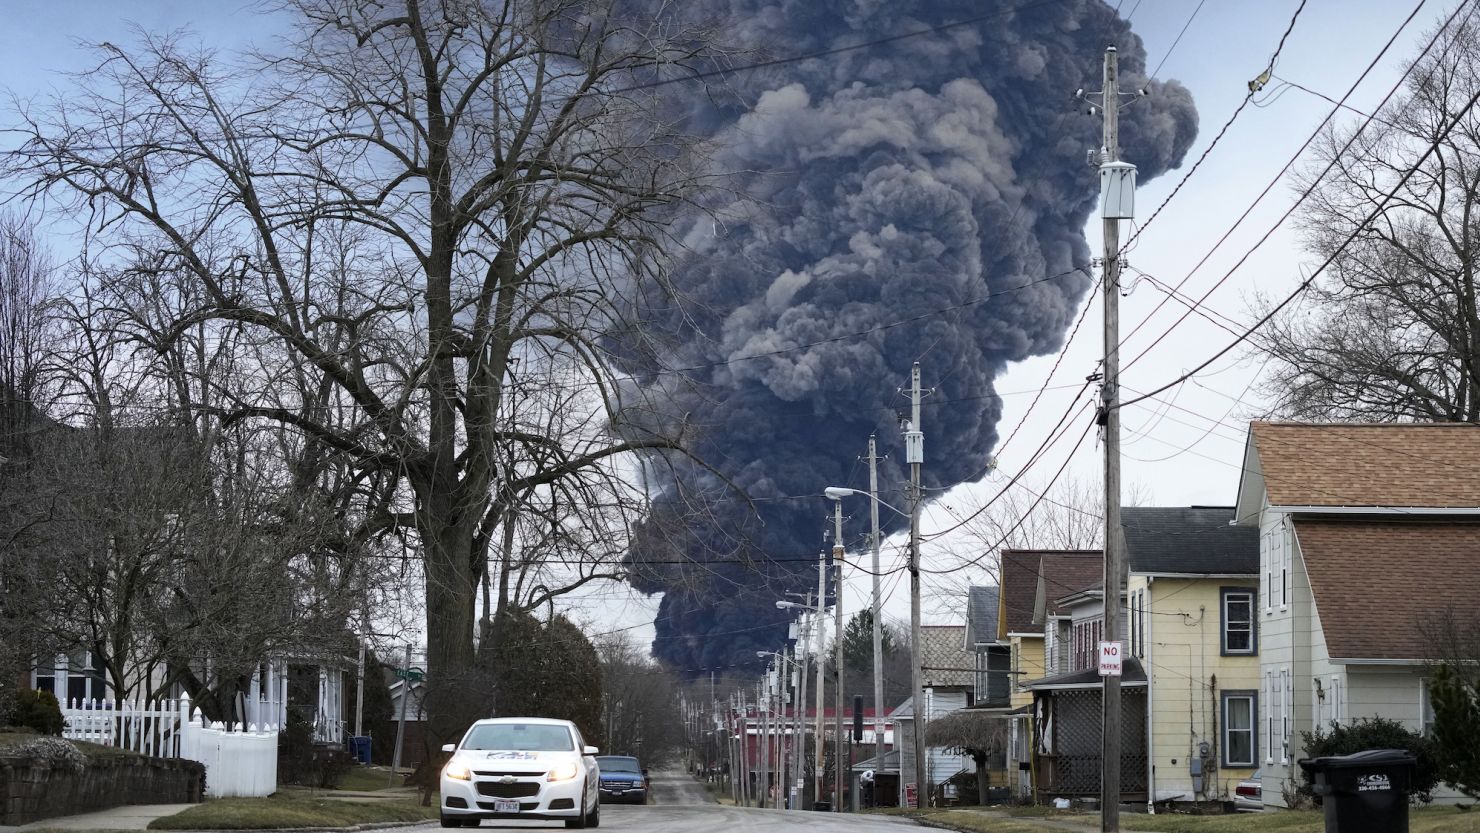 A black plume rises over East Palestine, Ohio, due to the controlled detonation of a portion of the derailed Norfolk Southern train on Feb. 6, 2023.